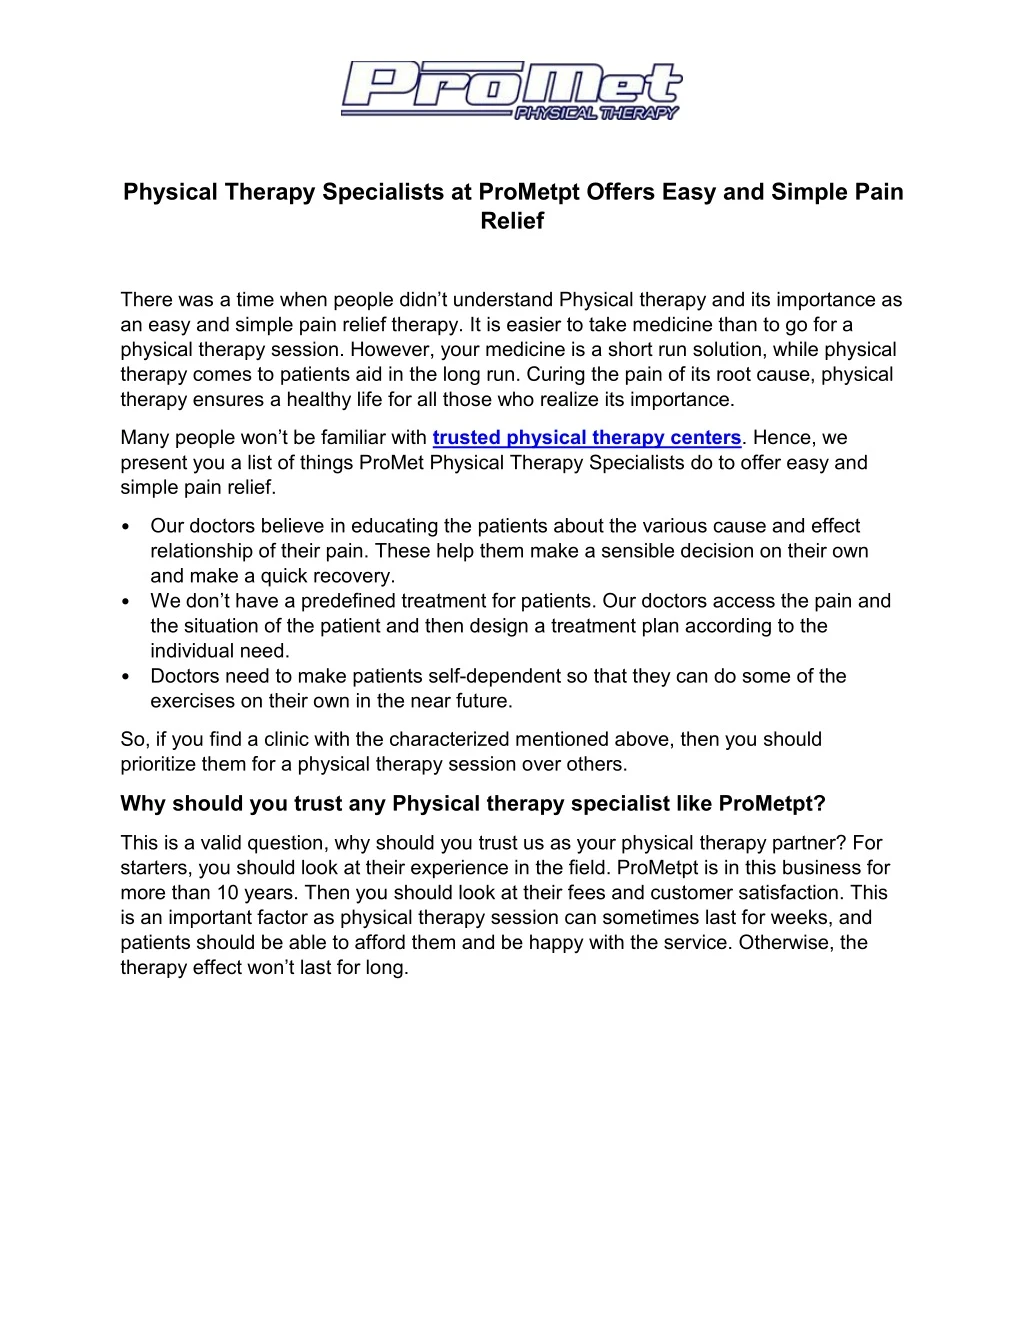 physical therapy specialists at prometpt offers